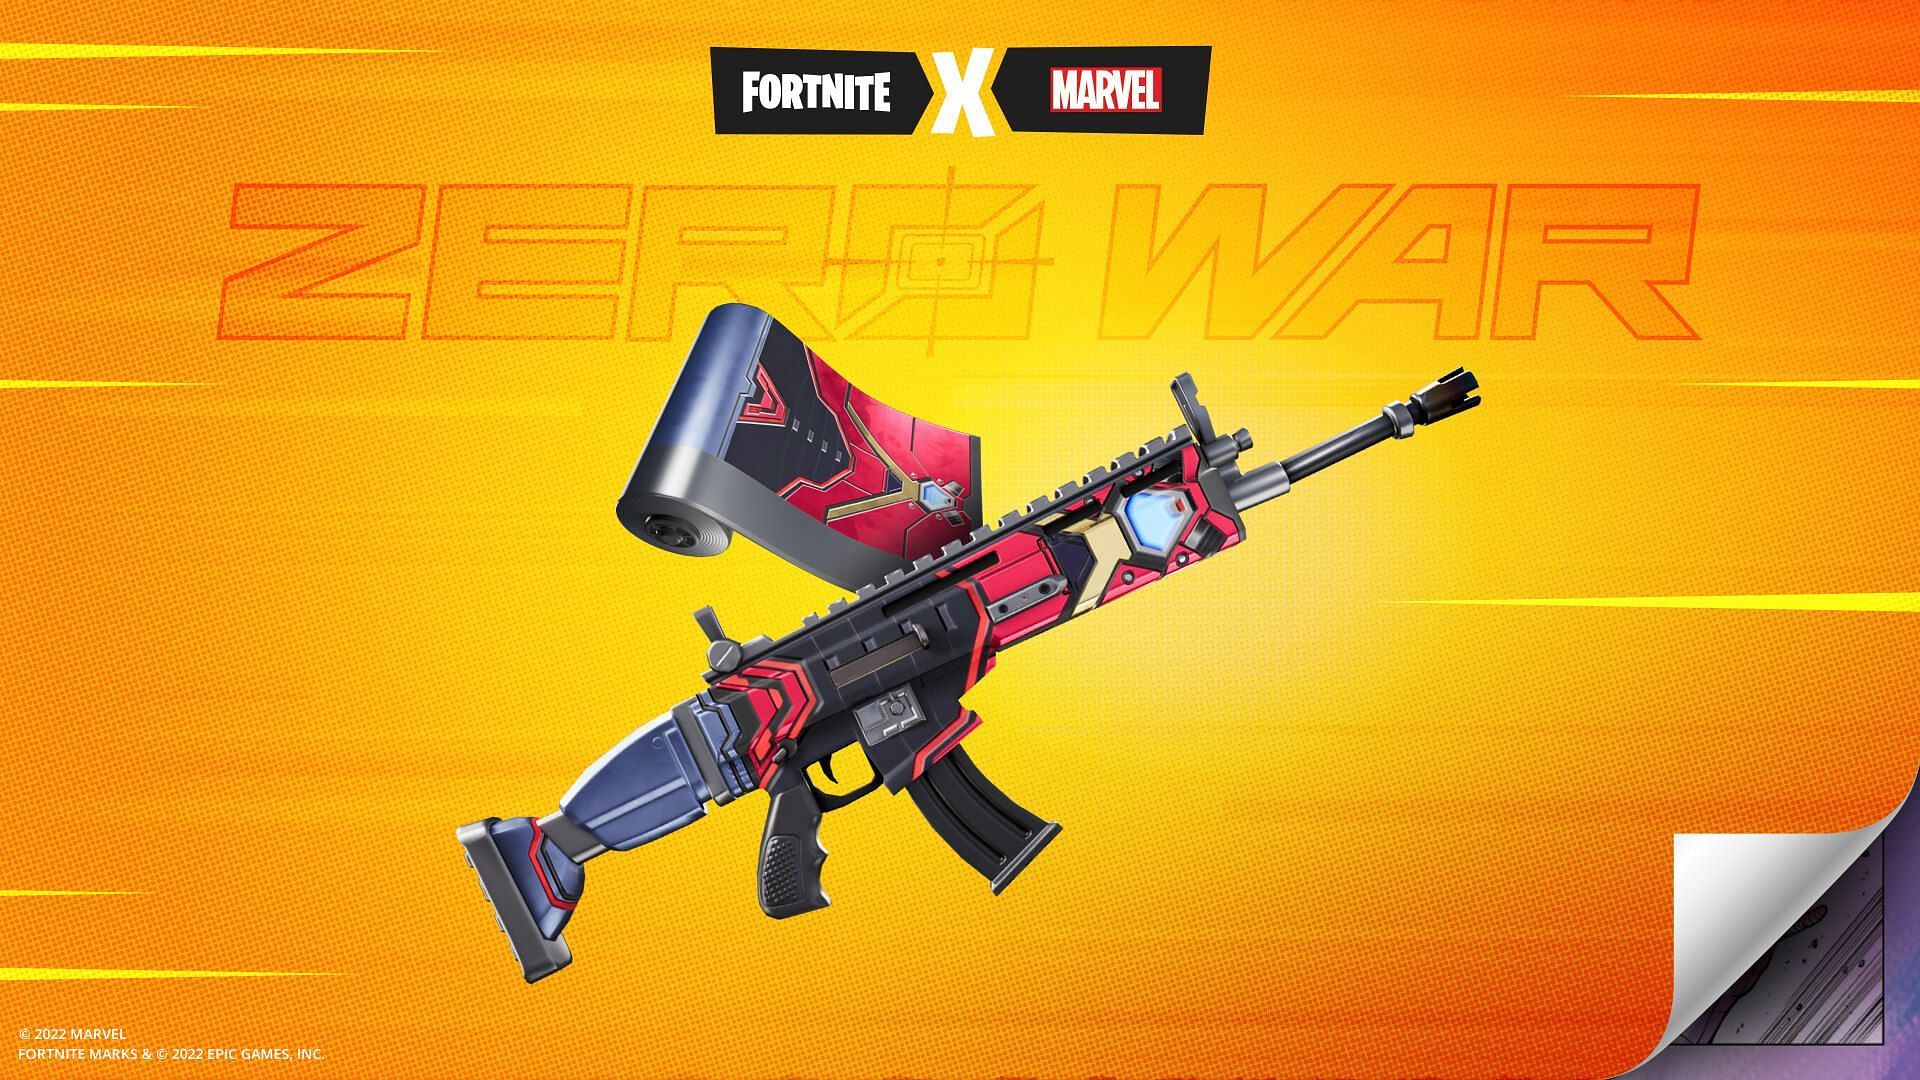 There are six different Fortnite x Marvel cosmetics that can be obtained with the code (Image via Epic Games)